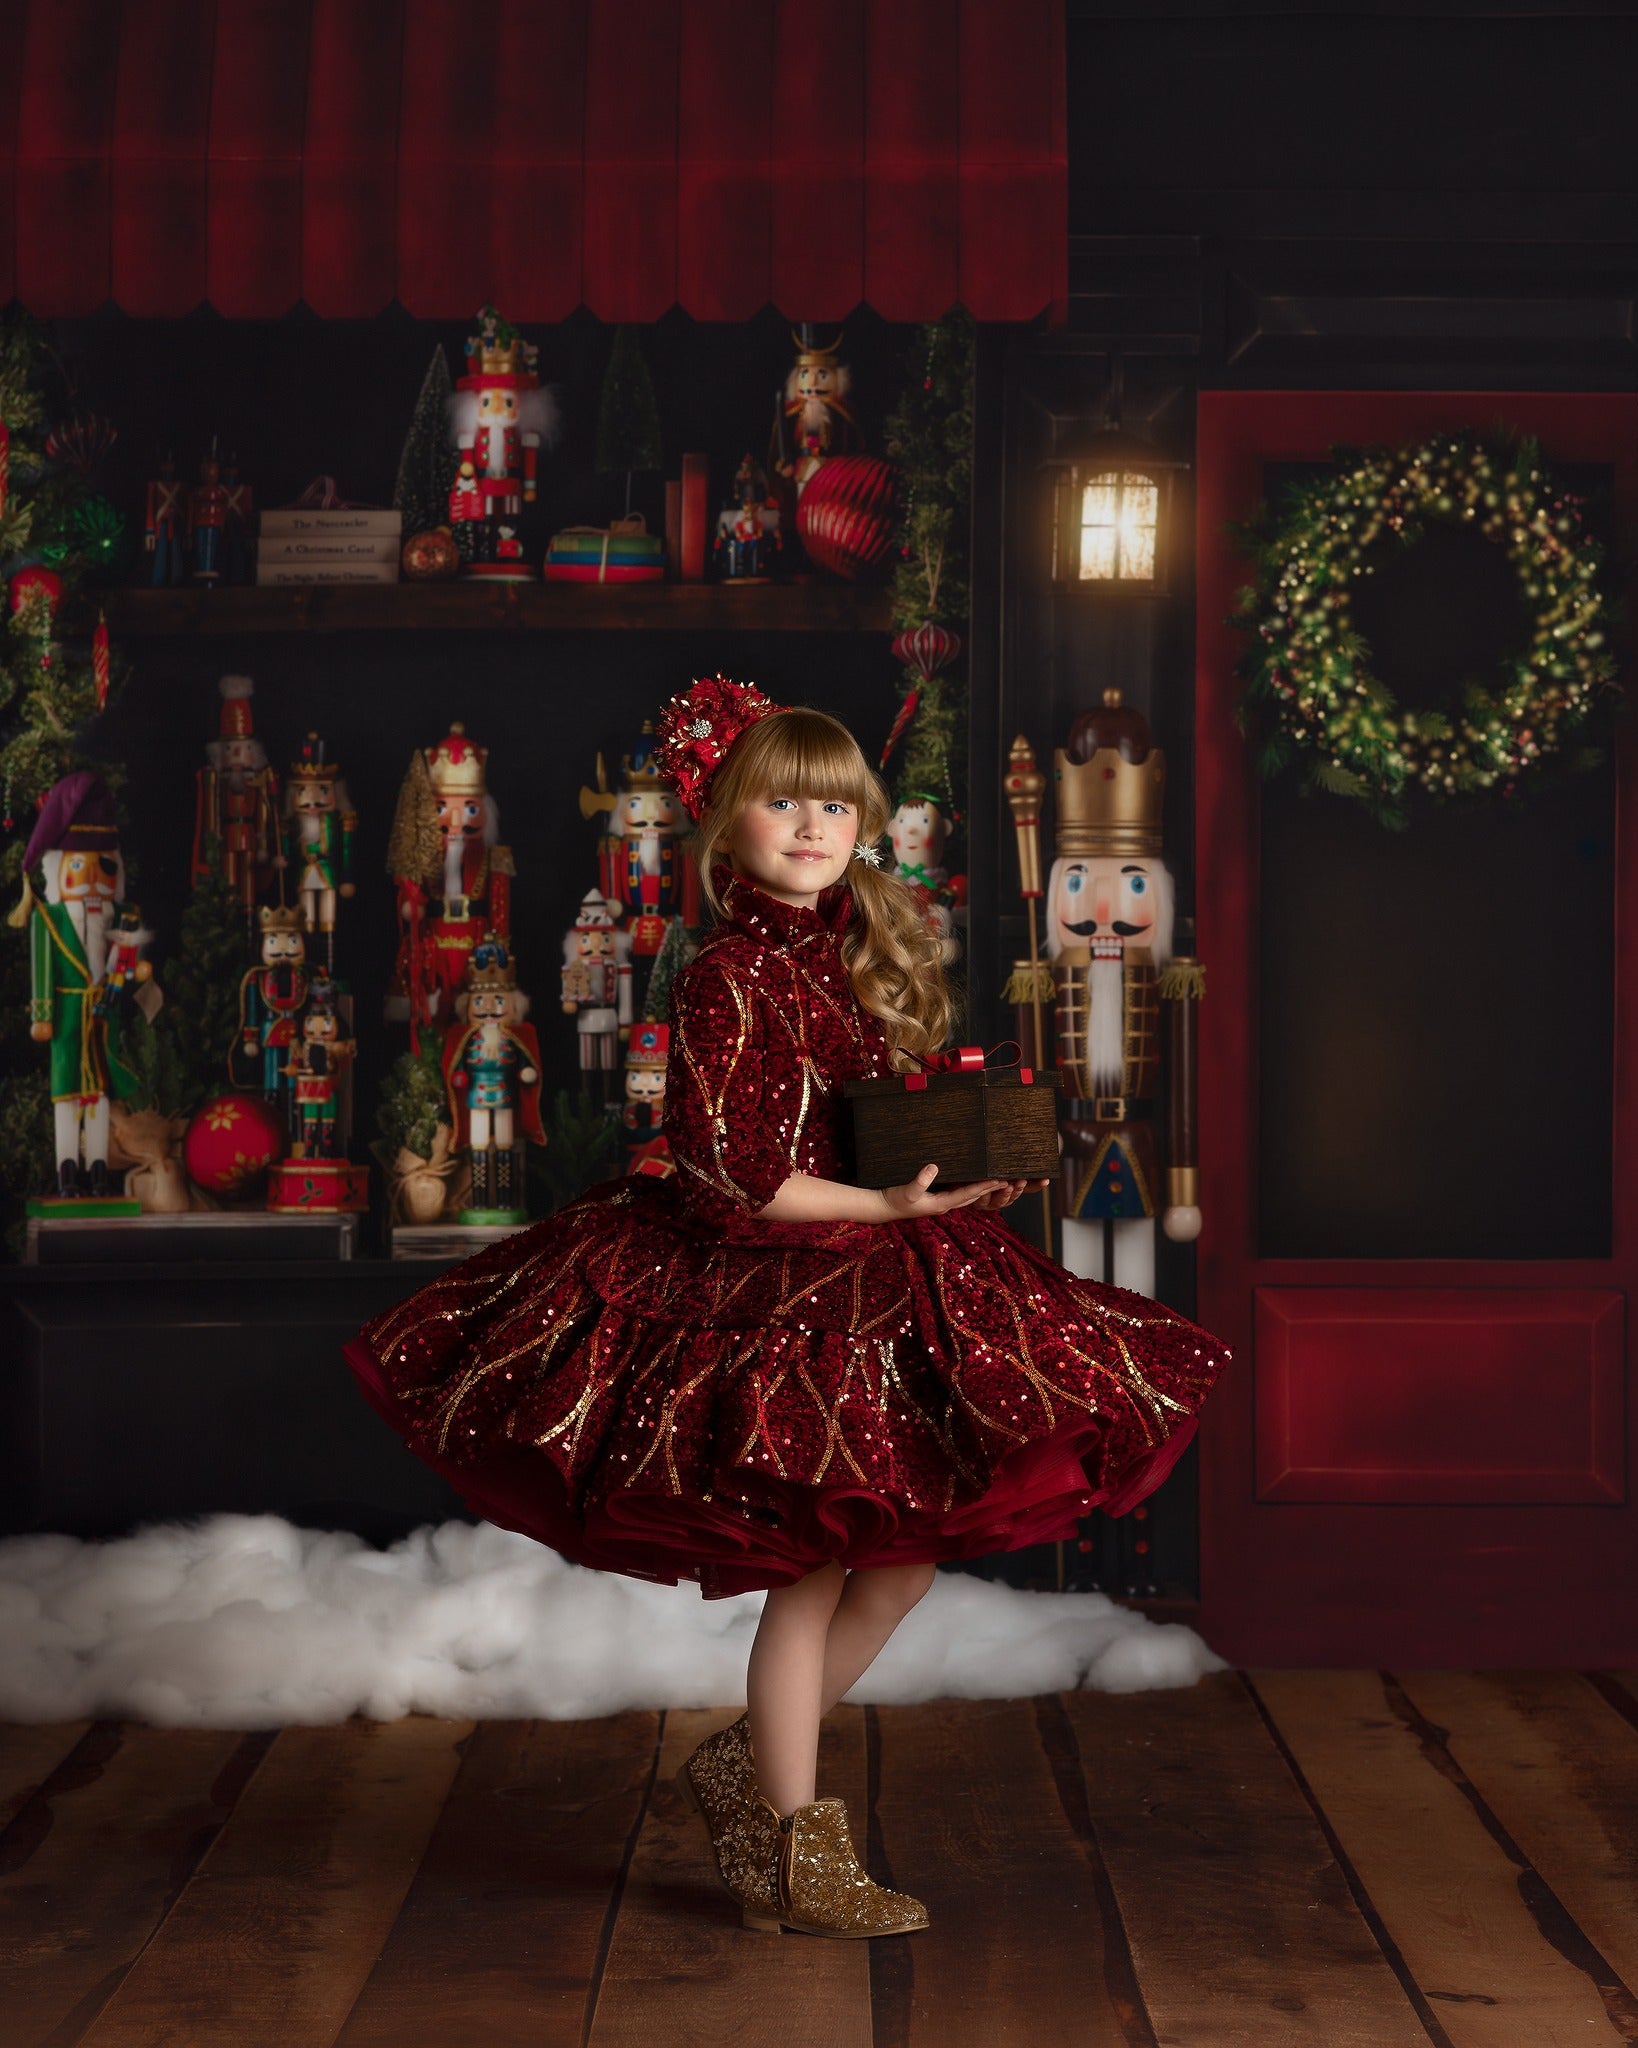 For a limited time! "Nutcracker" With Sleeve Option Petal Length Dress  Editorial Dress, Couture Gown, Special Occasion Dress